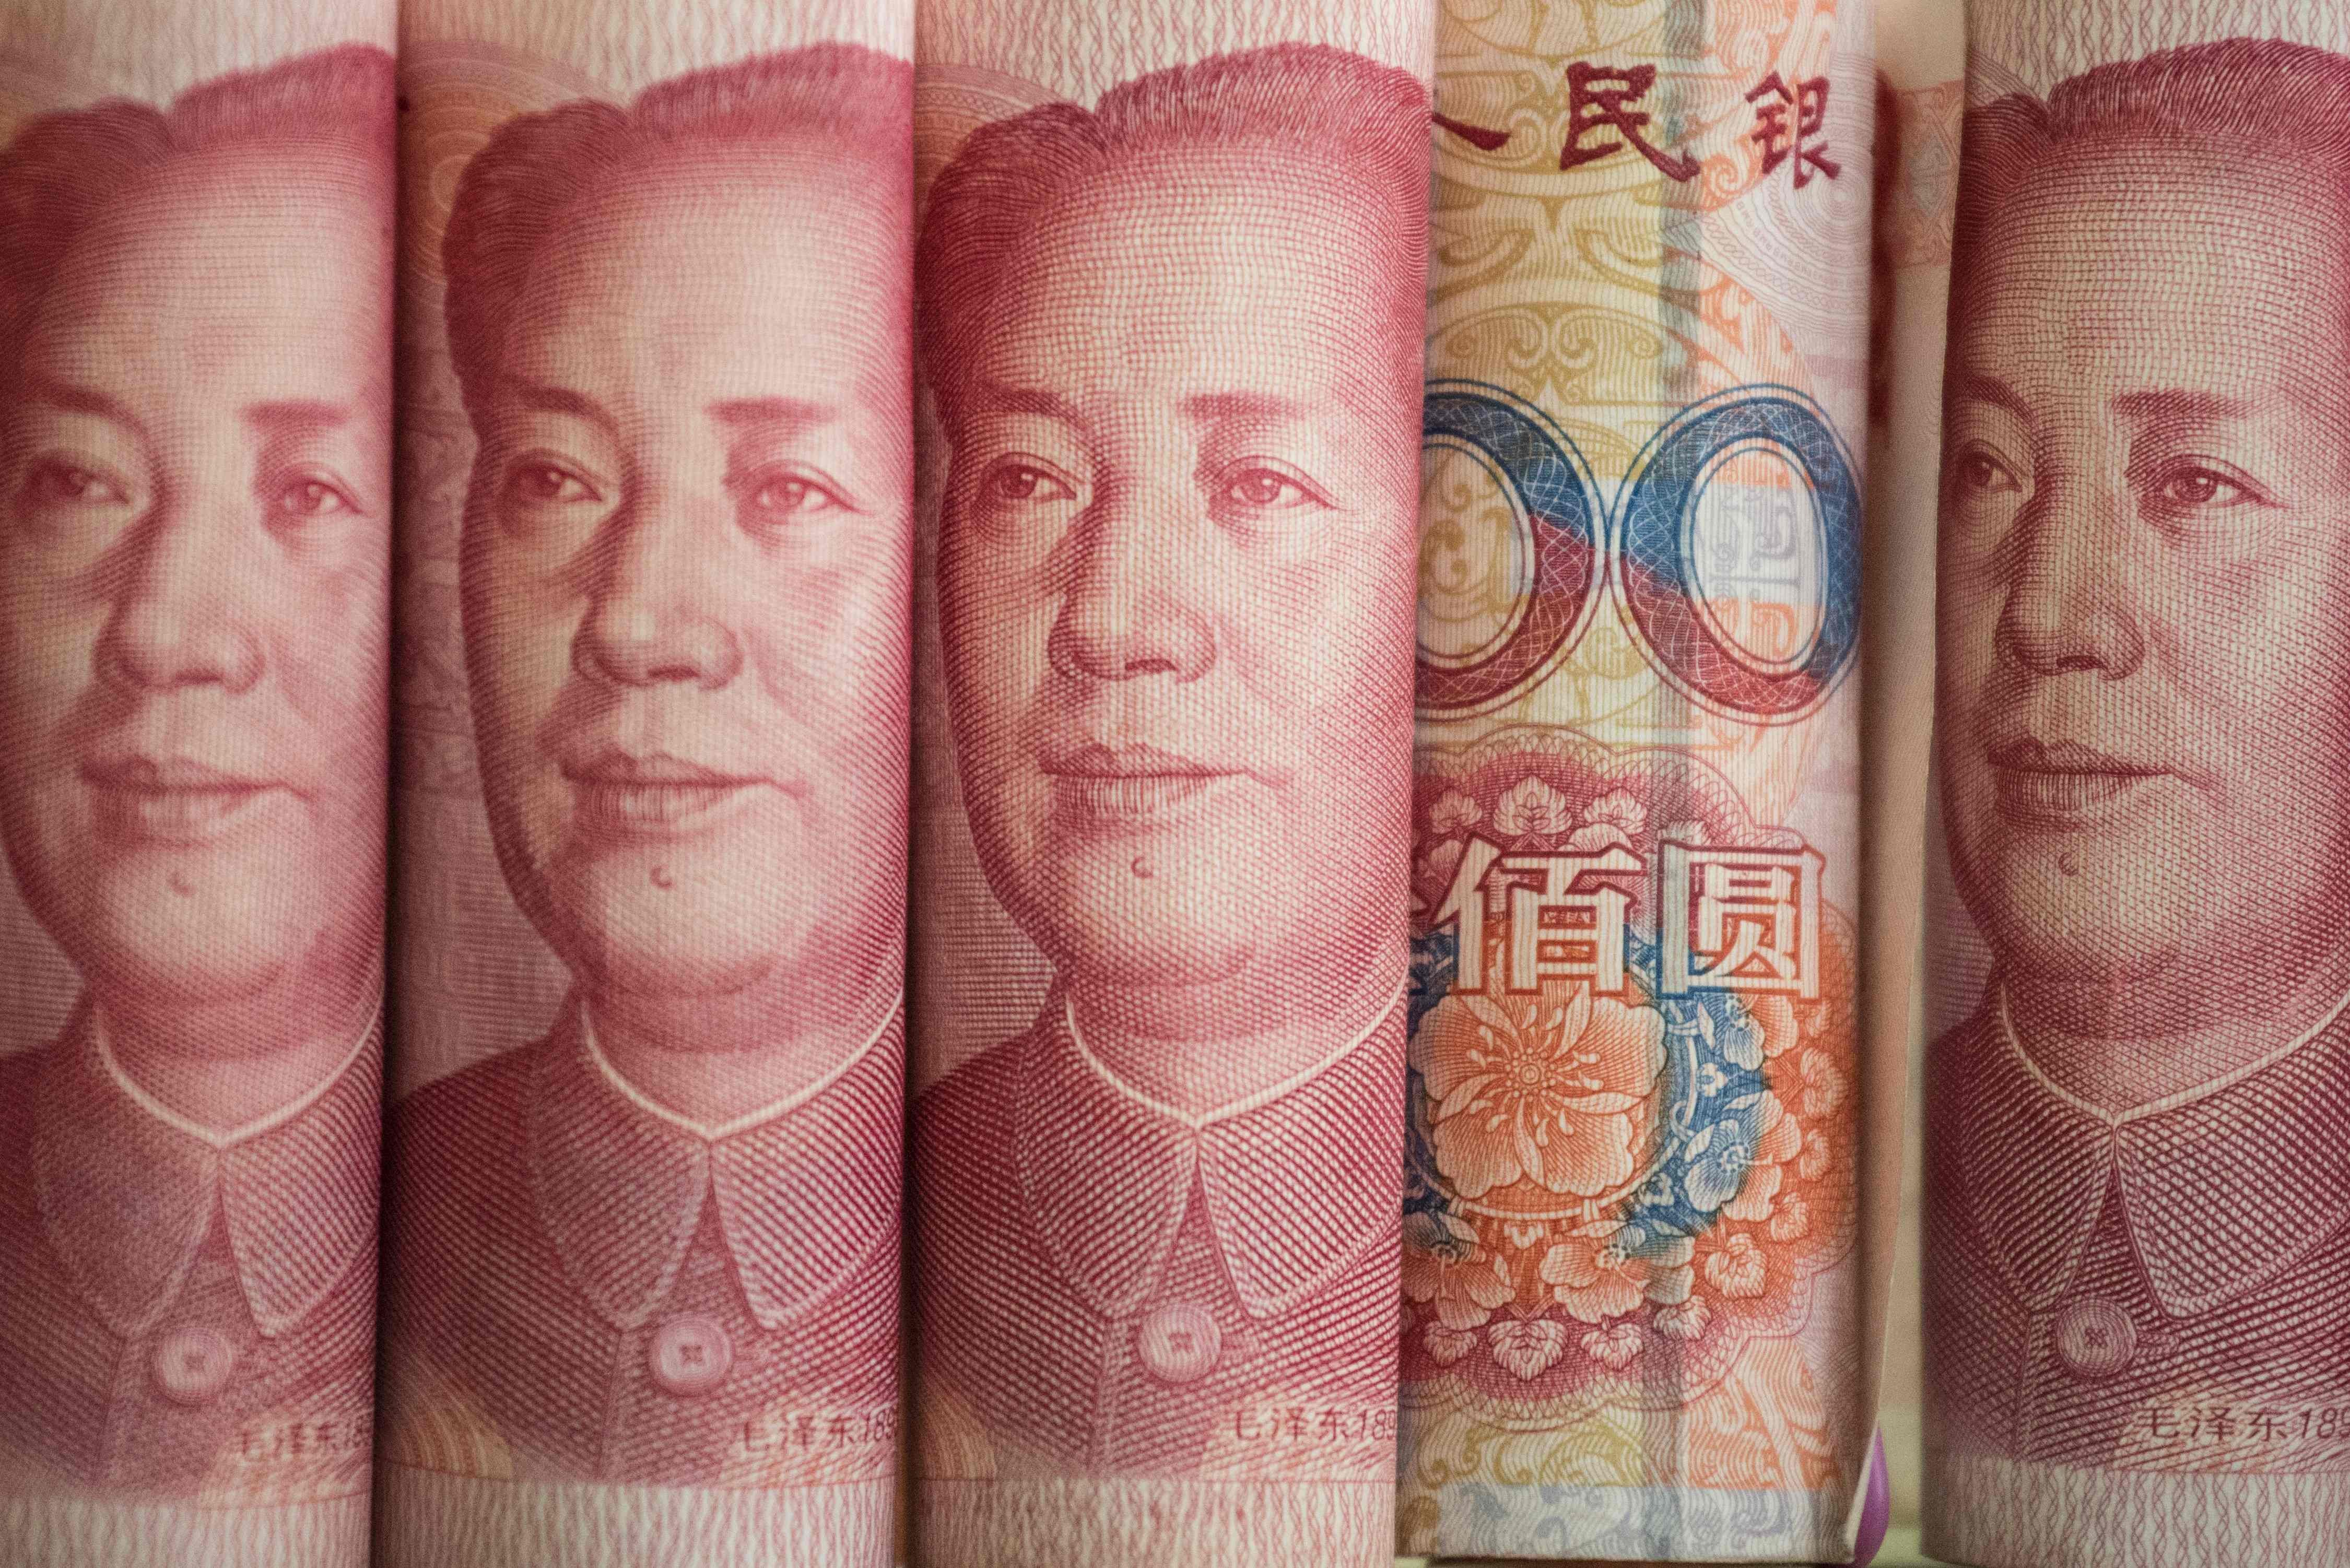 The Chinese government is seeking to limit the supply of credit as part of moves to contain financial risk. Photo: AFP